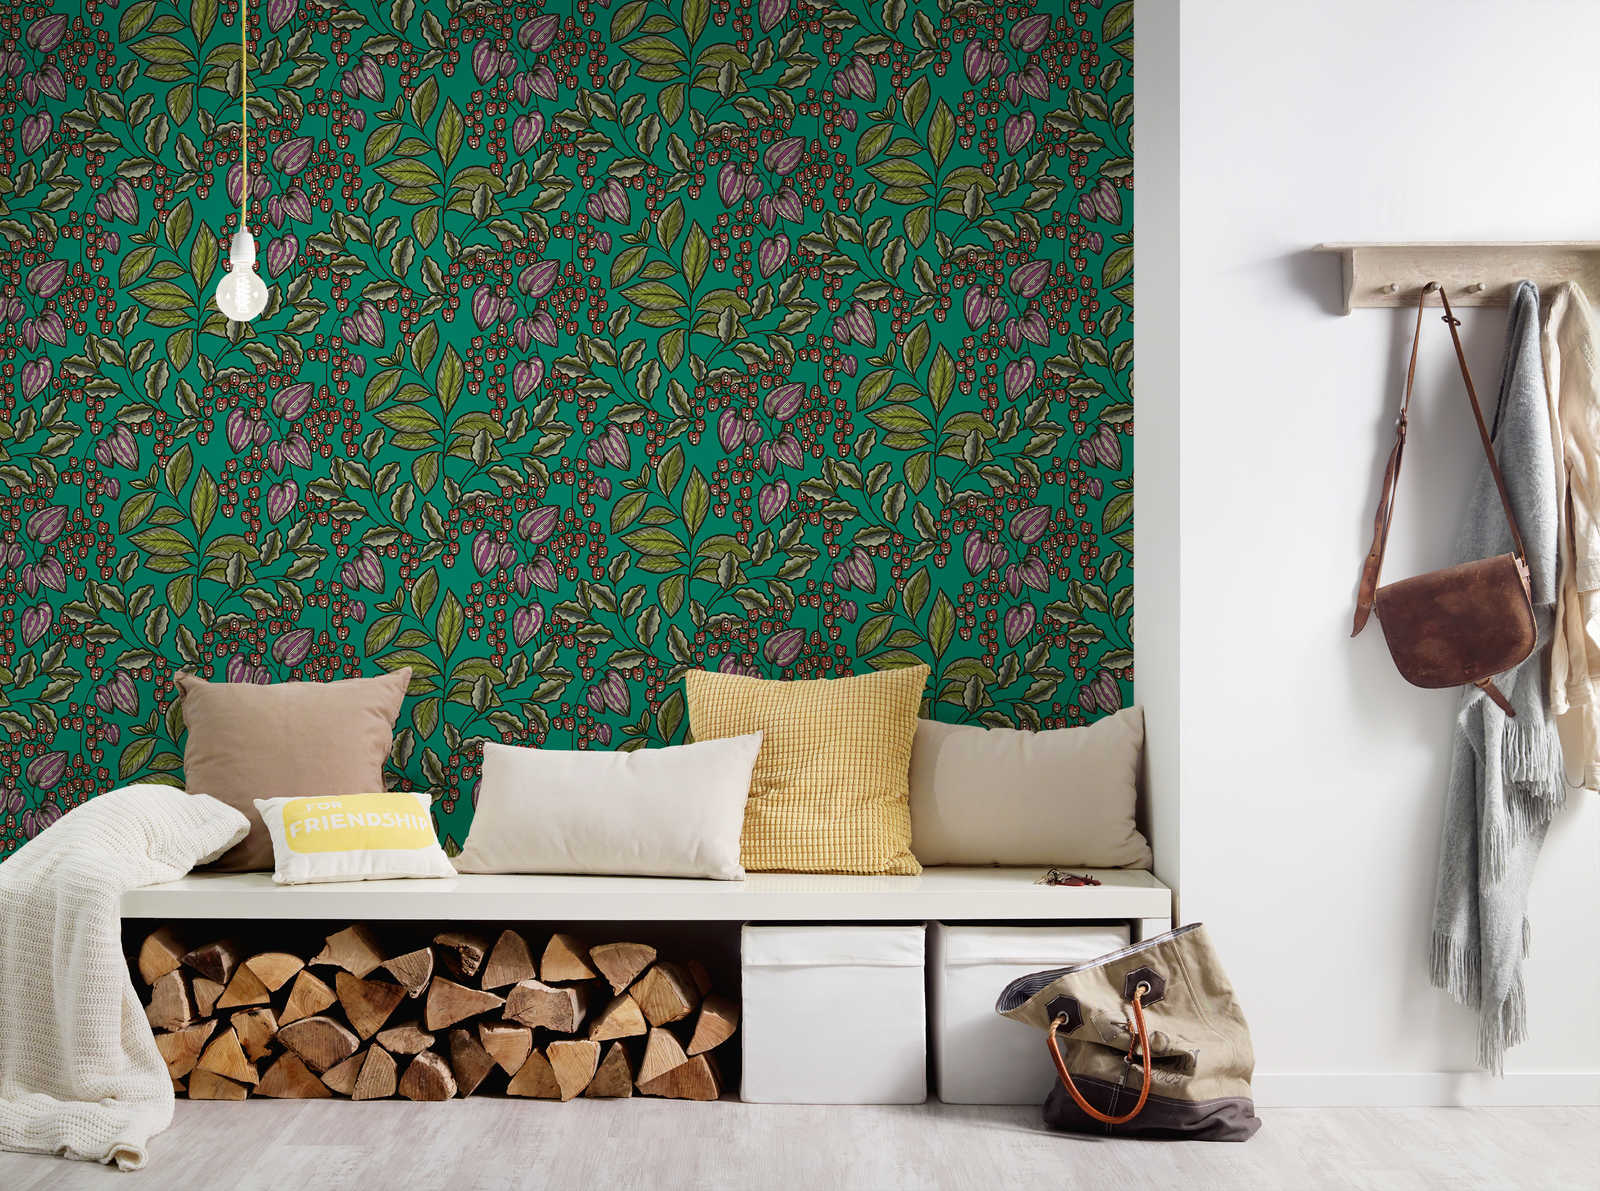             Wallpaper green with leaves motif in Scandi design - green, red, purple
        